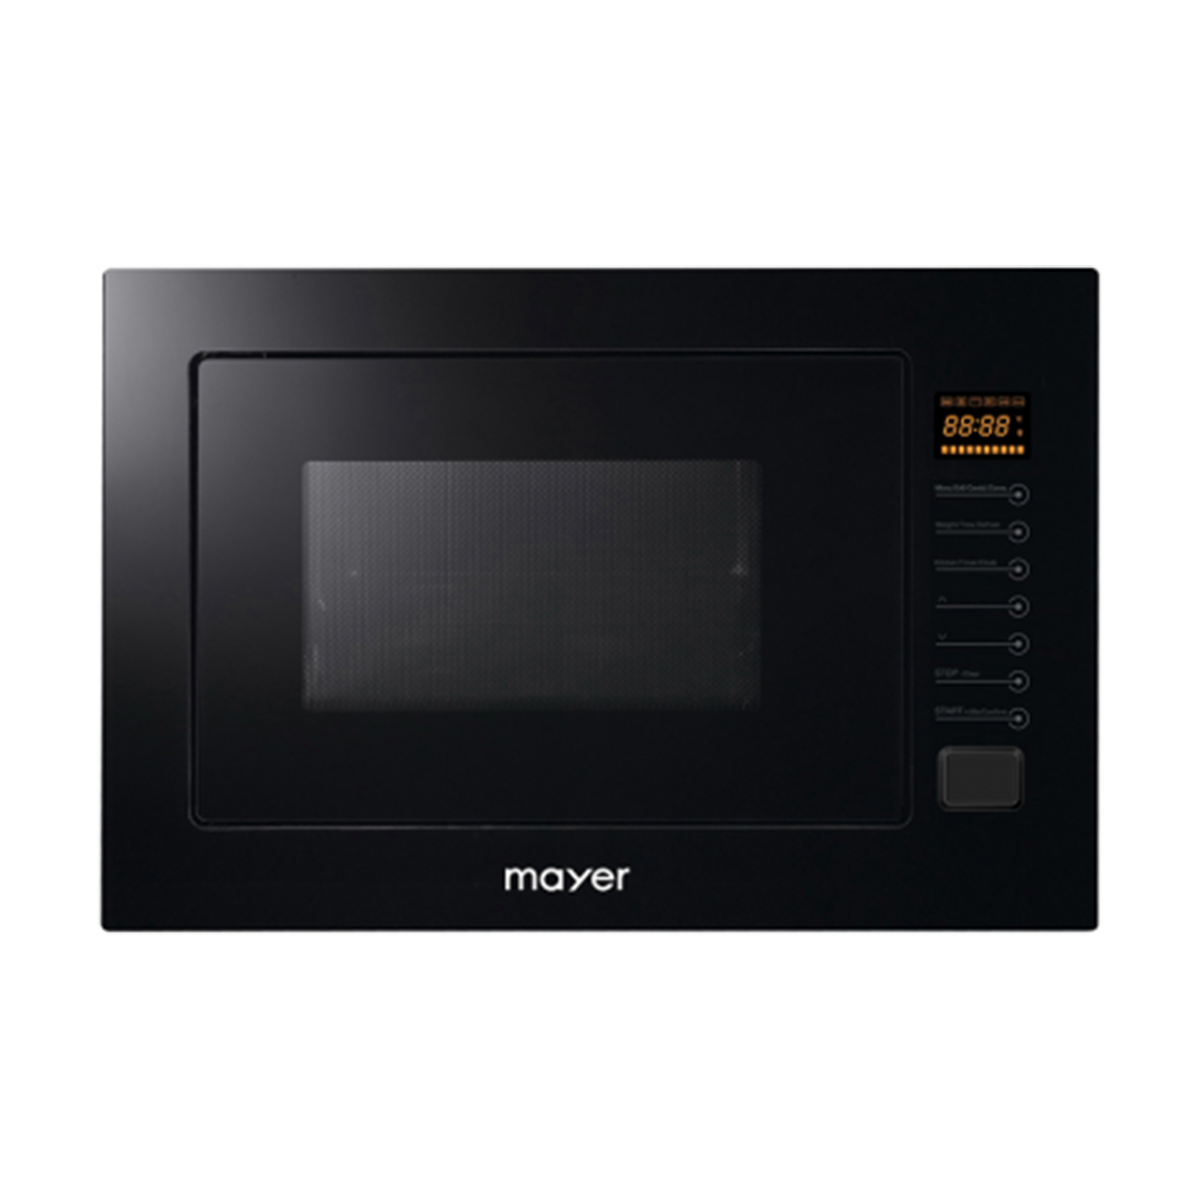 Mayer Built-in Microwave Oven with Grill